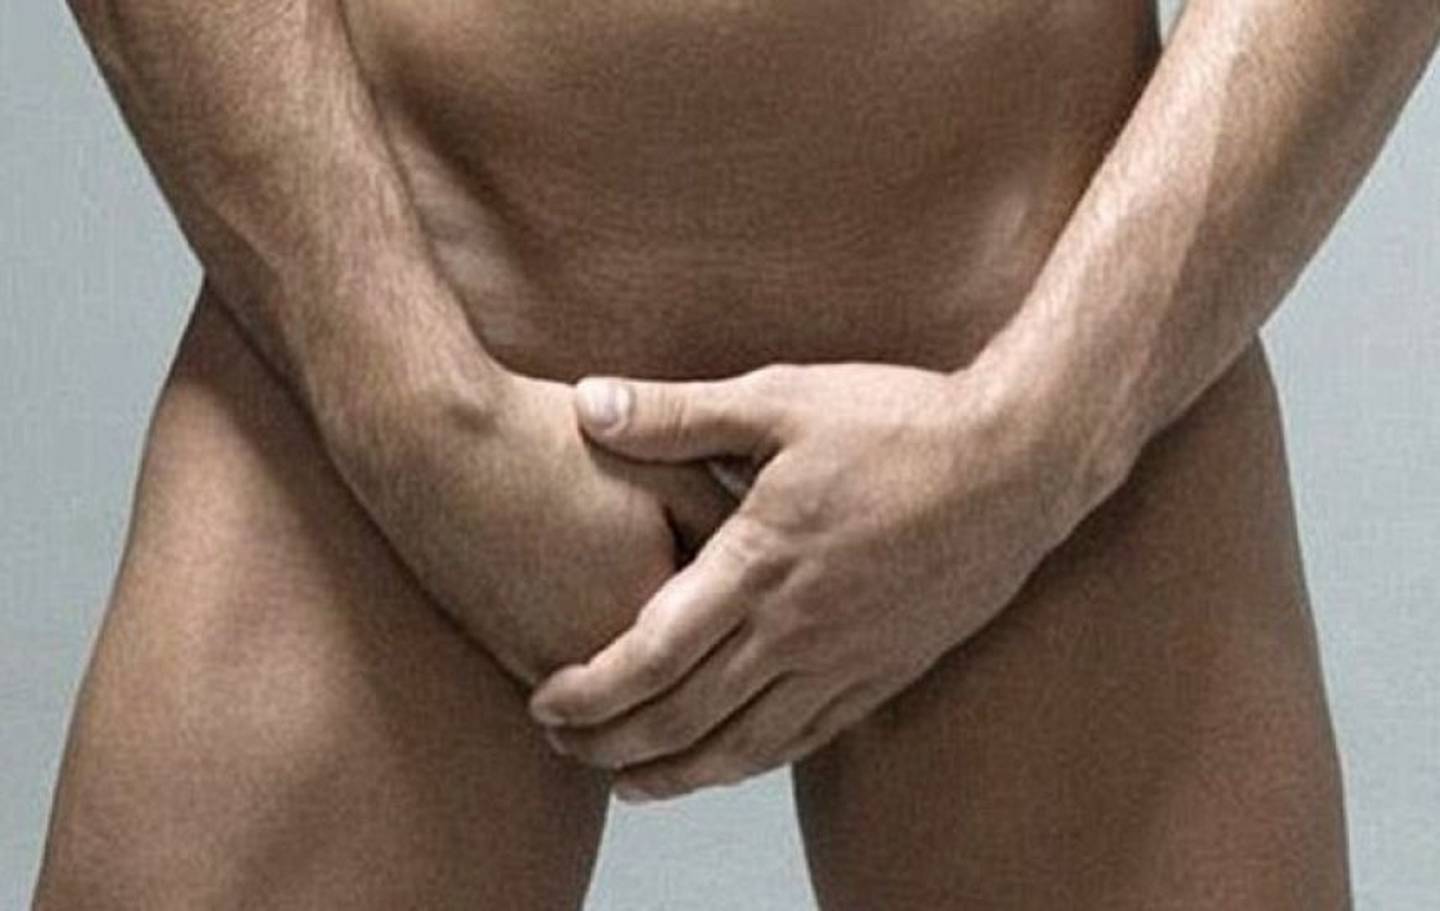 World Penis Day: 5 scientific curiosities about the male organ